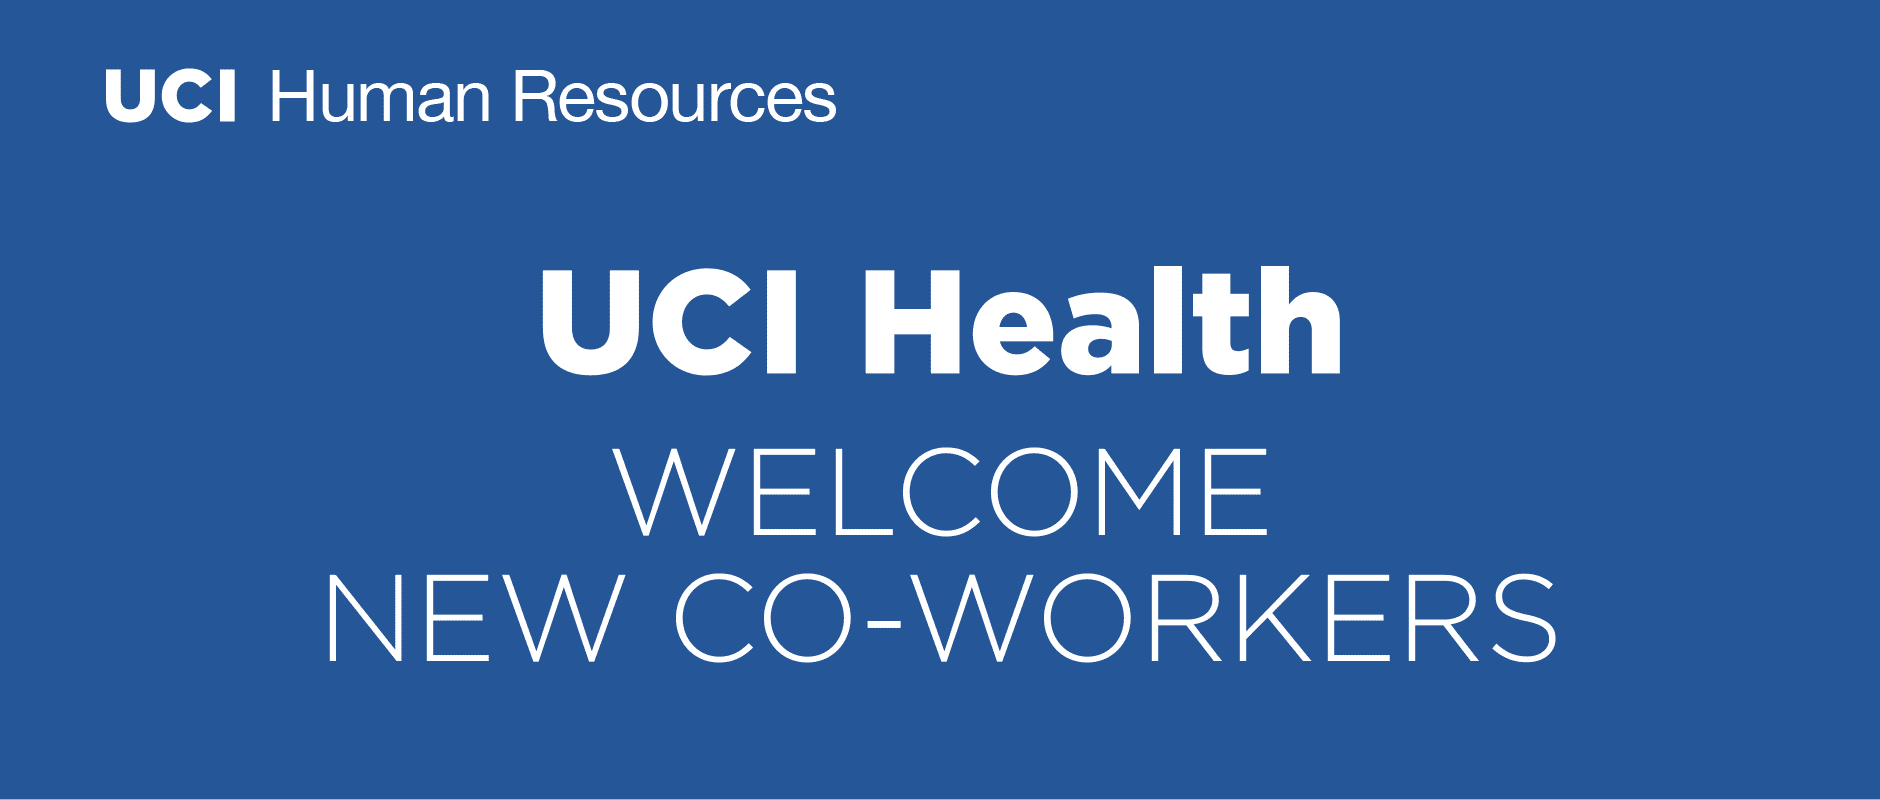 UCI Health - Welcome New Co-Workers